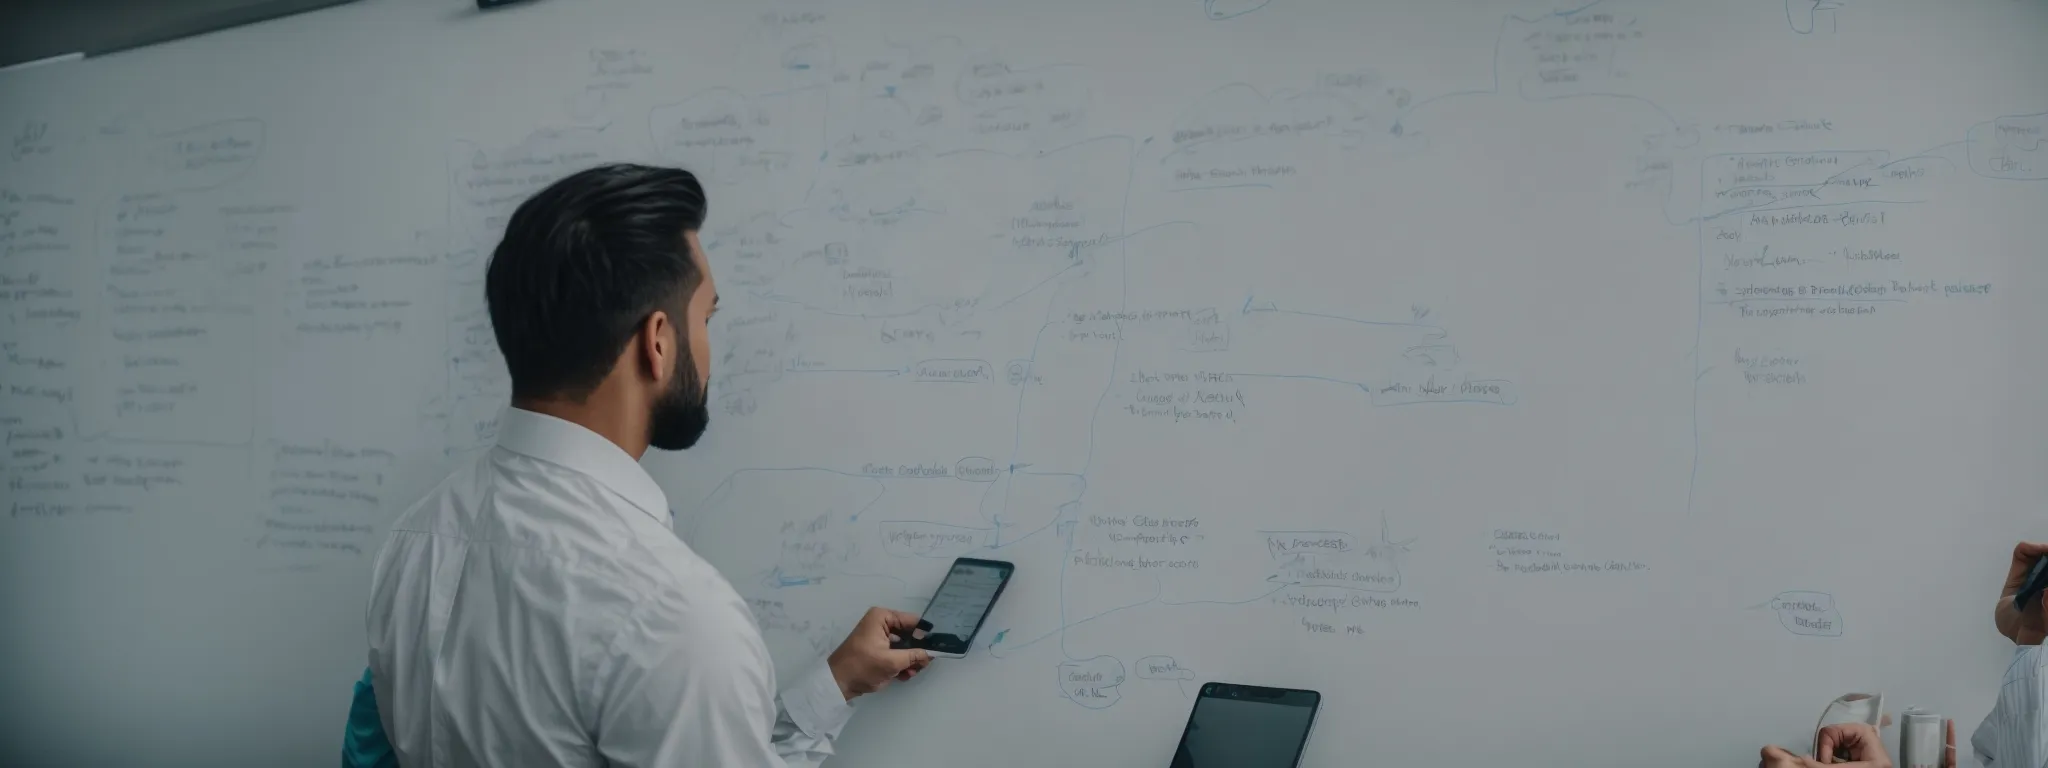 a strategist outlines a robust seo plan on a whiteboard, illustrating connections between various ecommerce products and potential influencer partnerships.